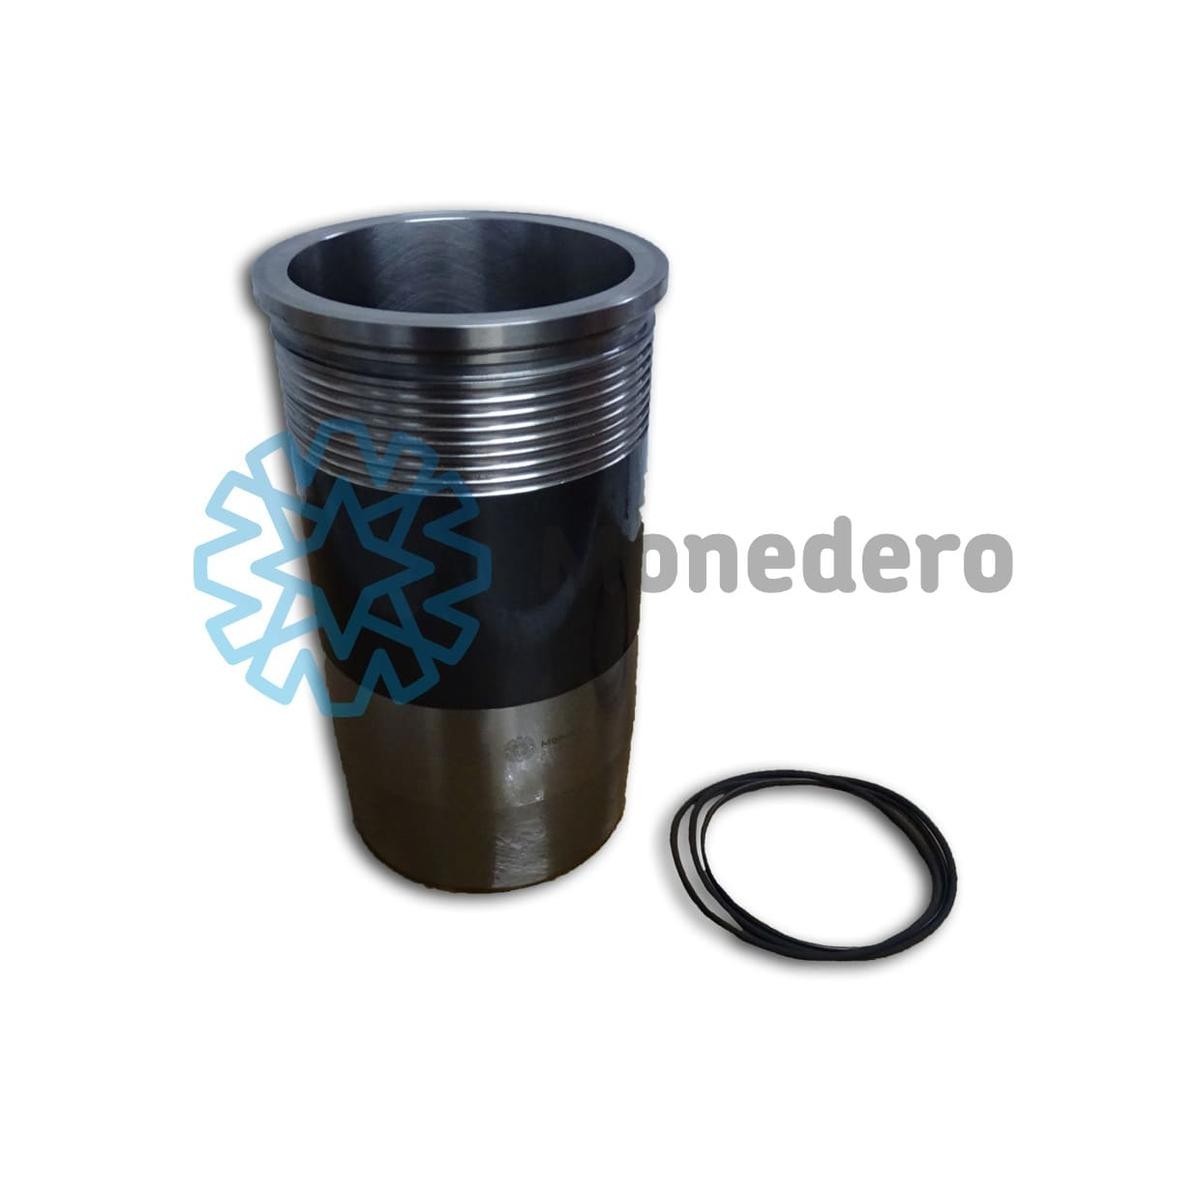 Original 20011300002 MONEDERO Cylinder sleeve experience and price